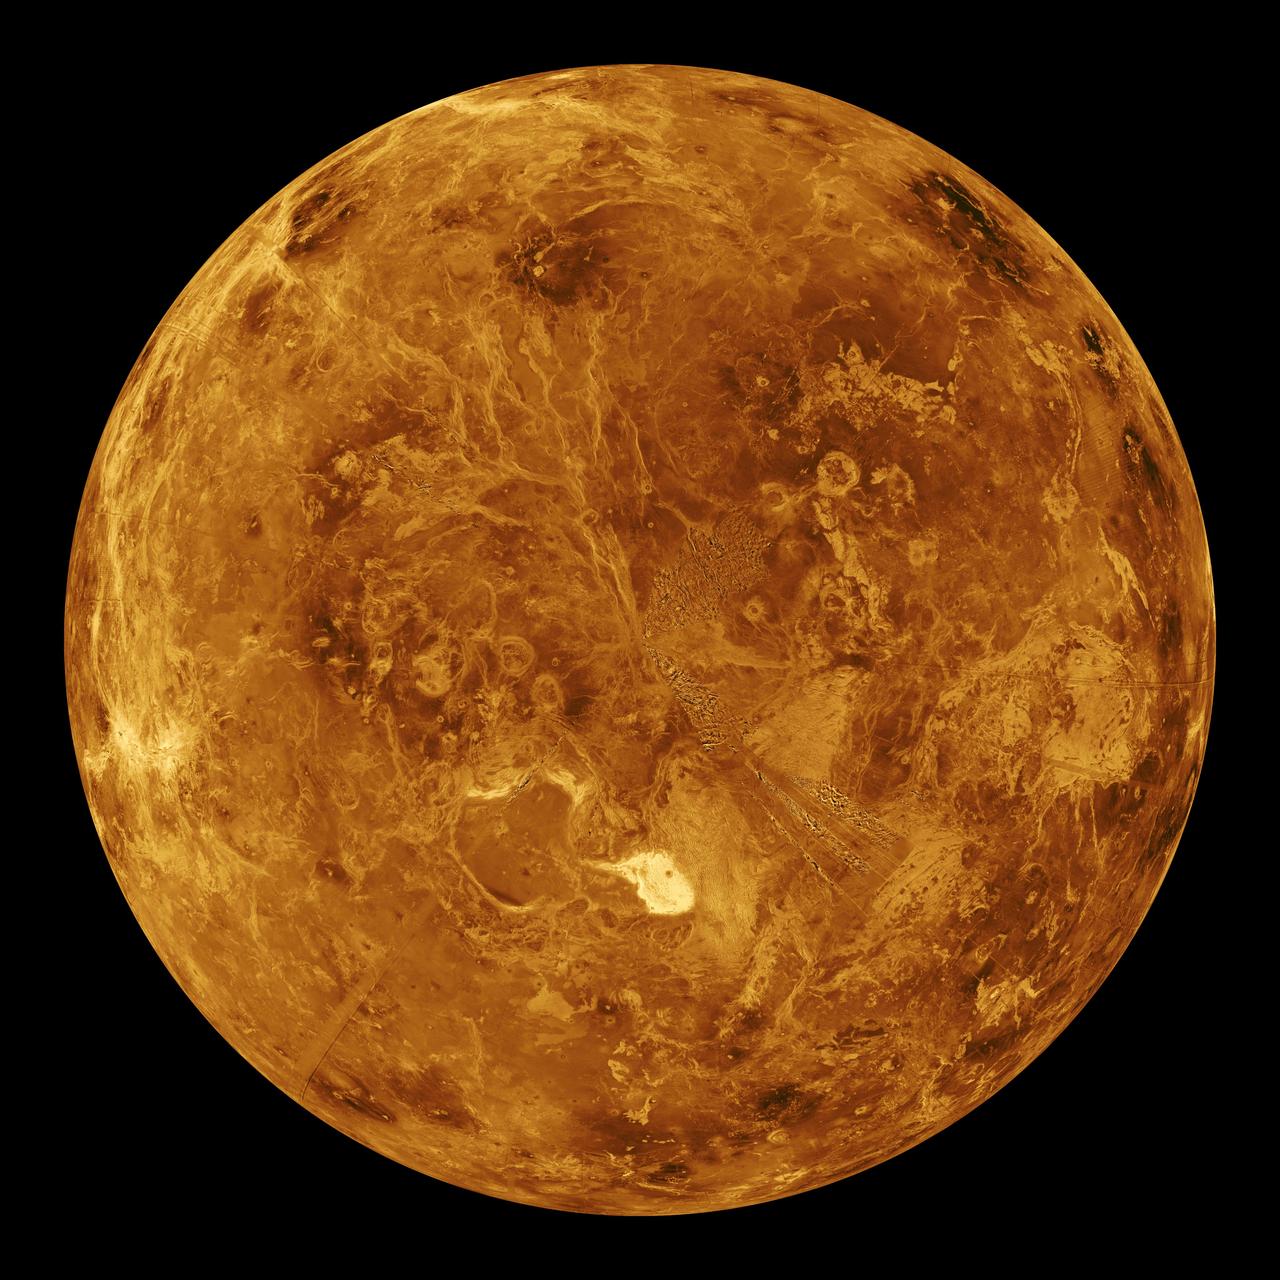 A computer simulated image of Venus. This shows the northern hemisphere of the planet as seen by the NASA Magellan spacecraft